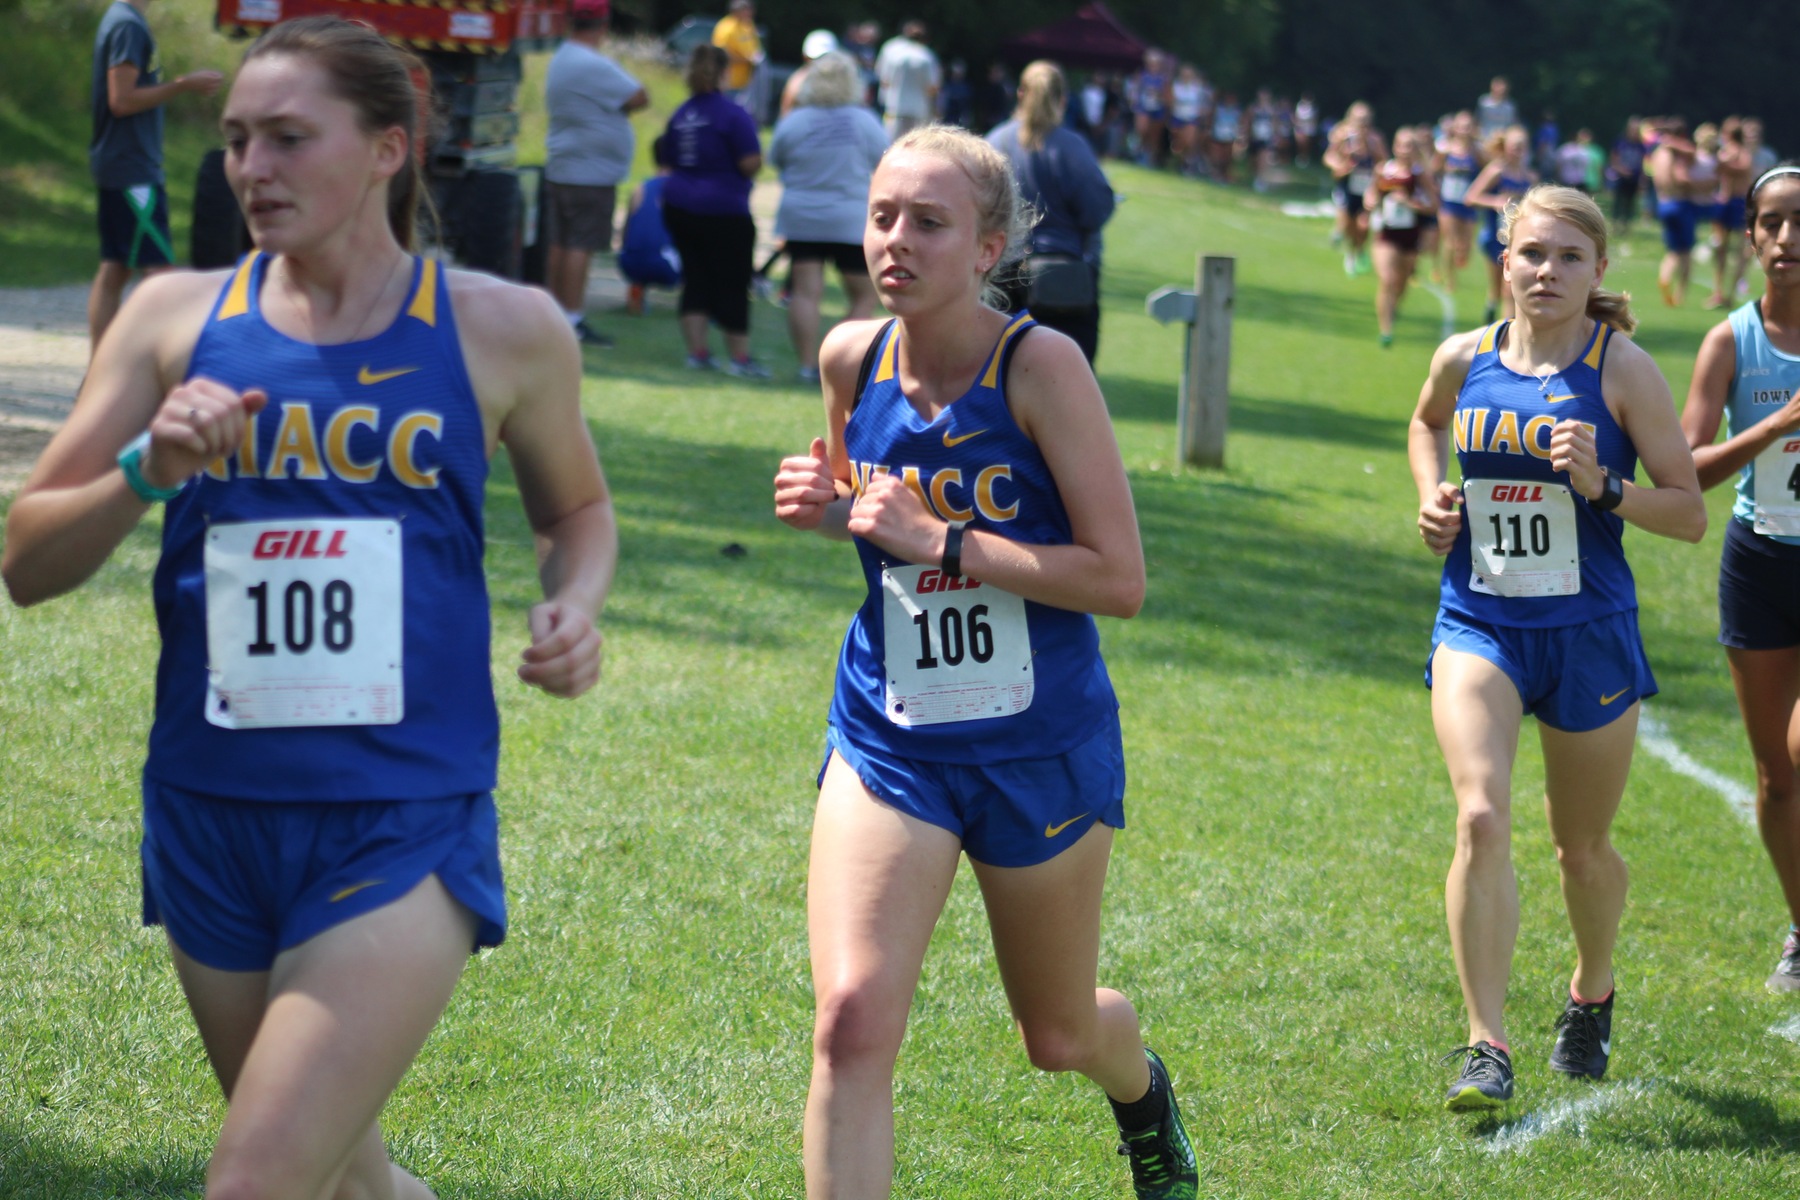 NIACC's Amy Fullerton (108) placed 16th at the regional time trial Saturday.